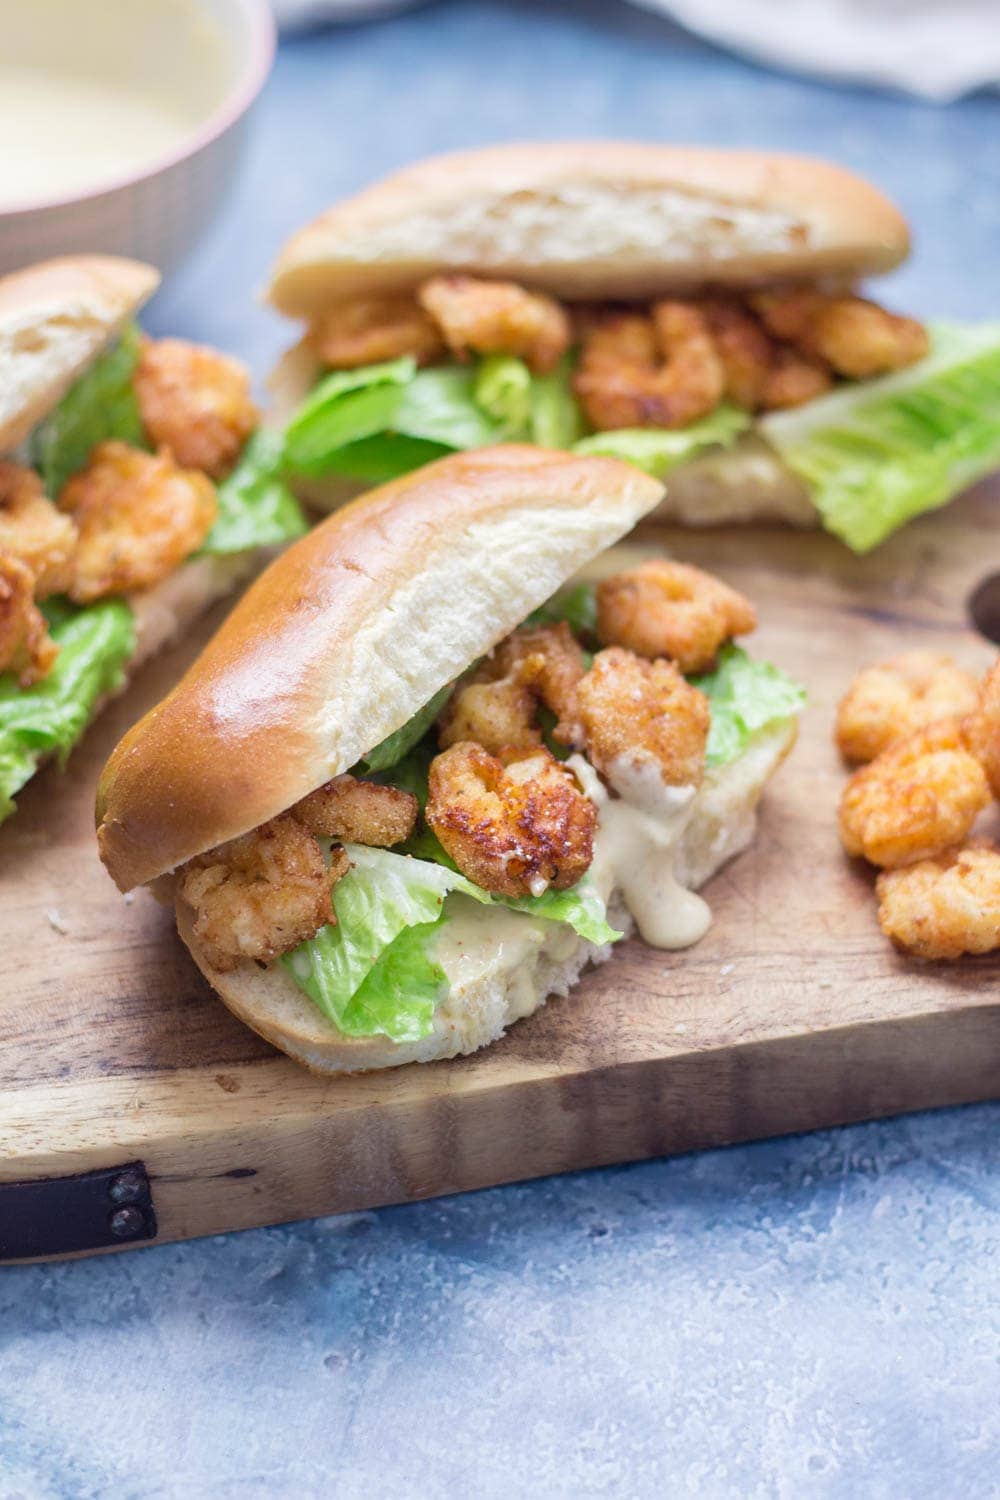 Prawn po' boys are made up of crispy prawns nestled into a bread roll with crunchy lettuce & tangy Cajun sauce. Bring a taste of New Orleans to your home! #sandwich #seafood #poboy #cajunfood #recipe